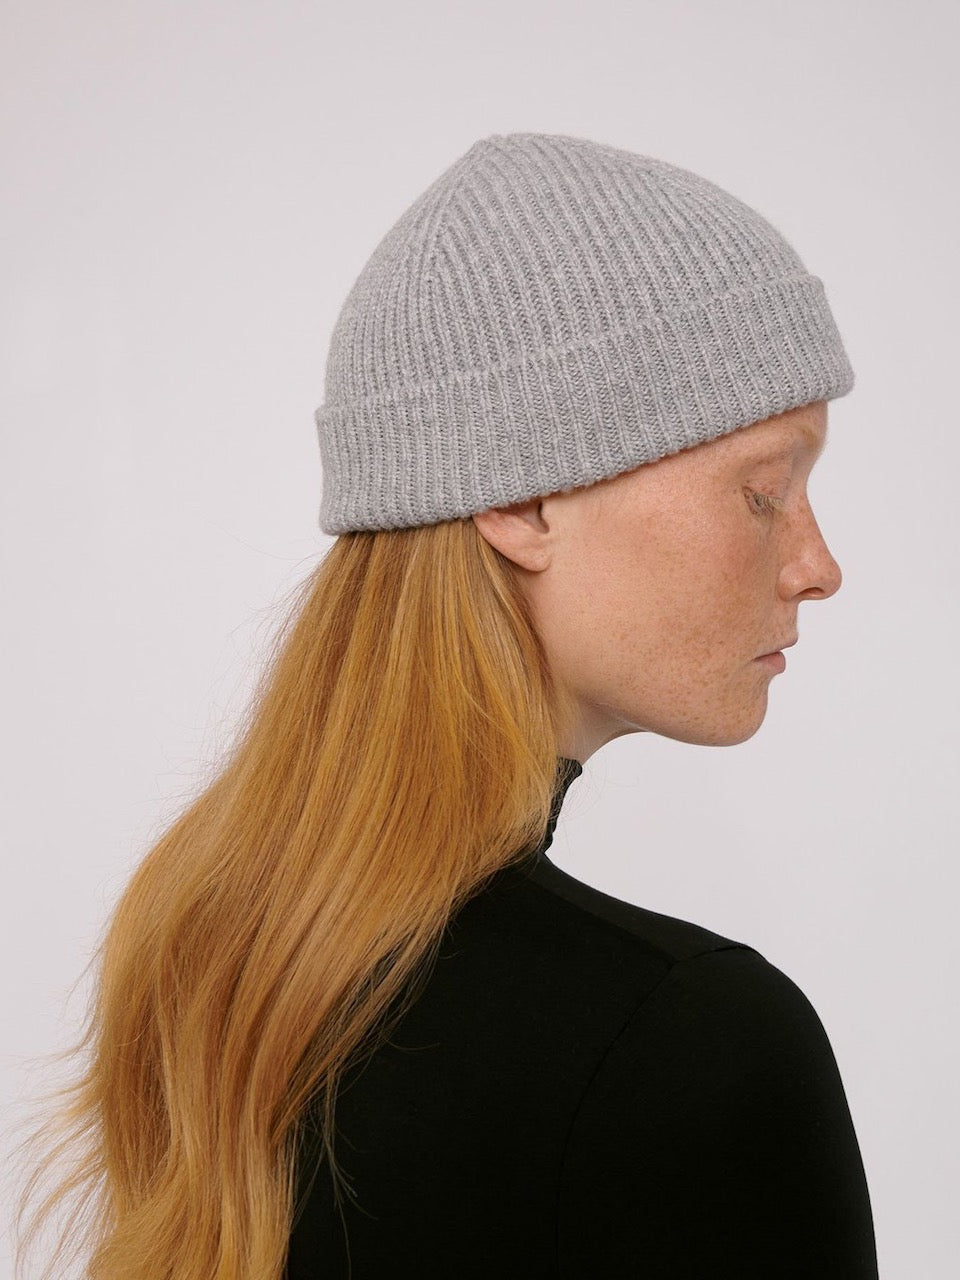 A woman wearing a Recycled Cashmere Beanie – Grey by Organic Basics.